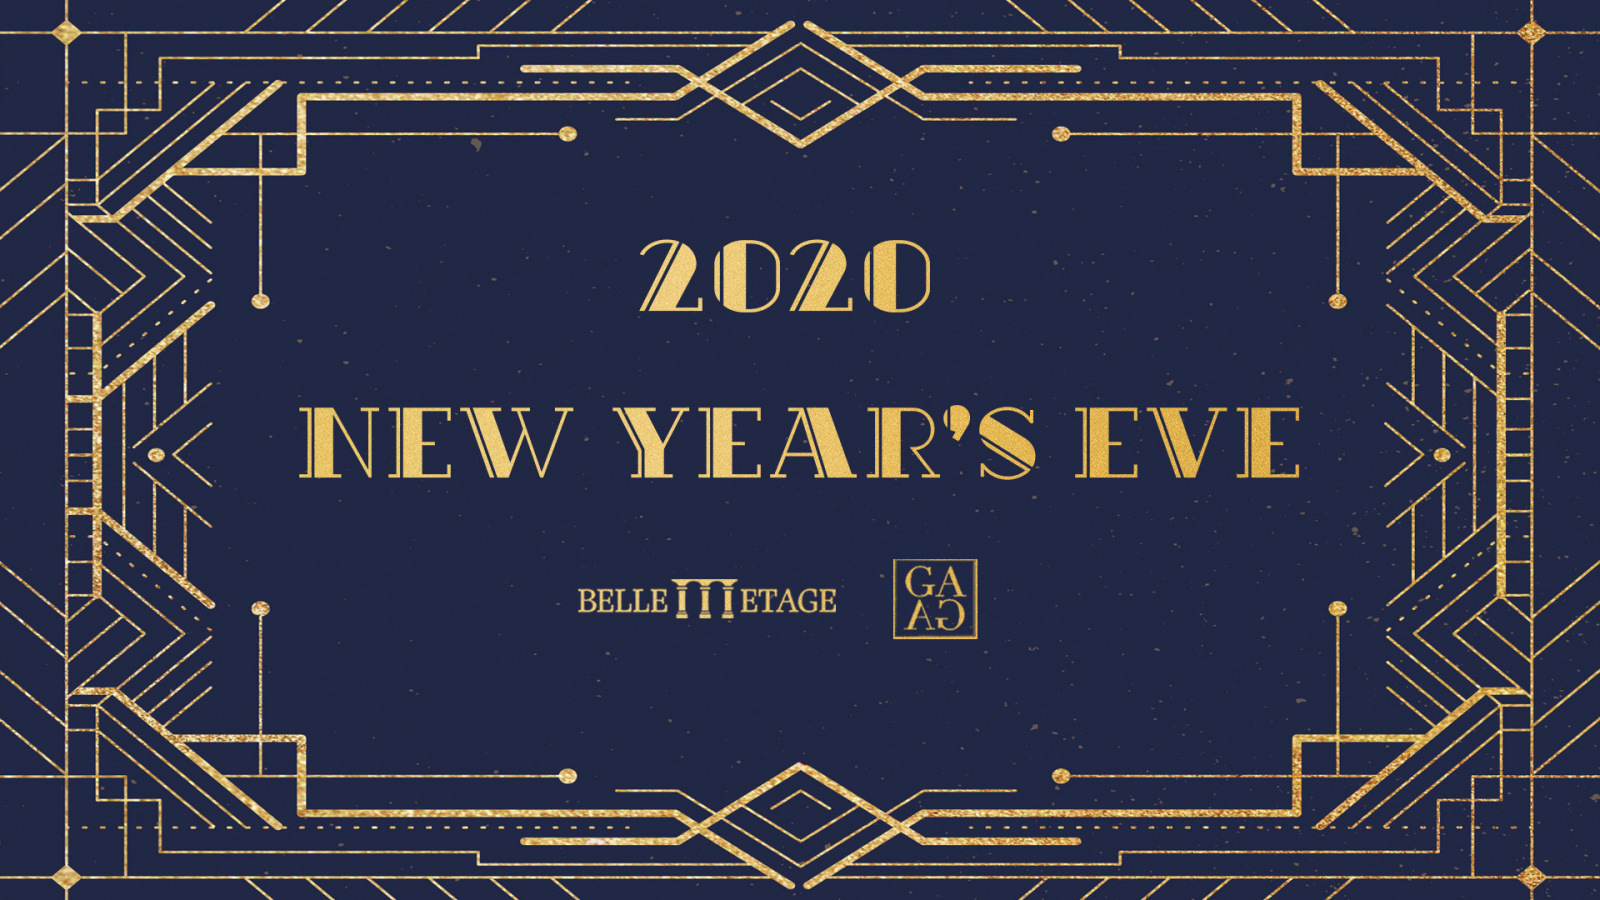 New Year's Eve 2020 by BELLE ETAGE & GAGA